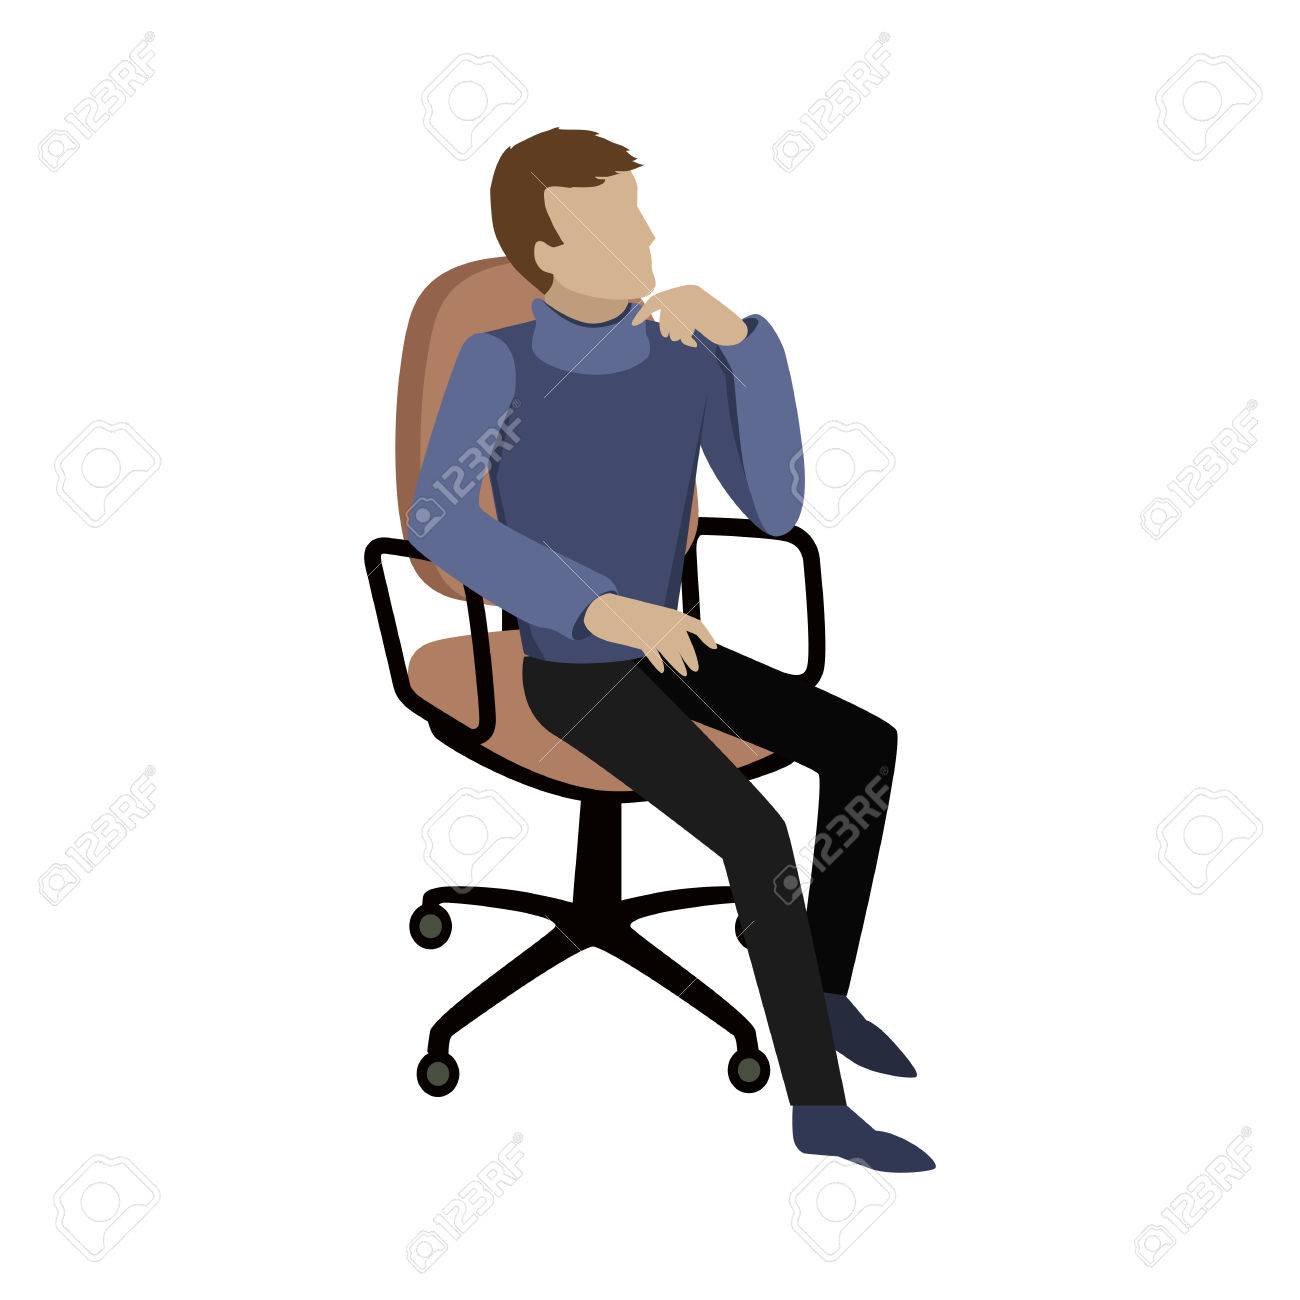 Man sitting on chair and dreaming about something or thinking...